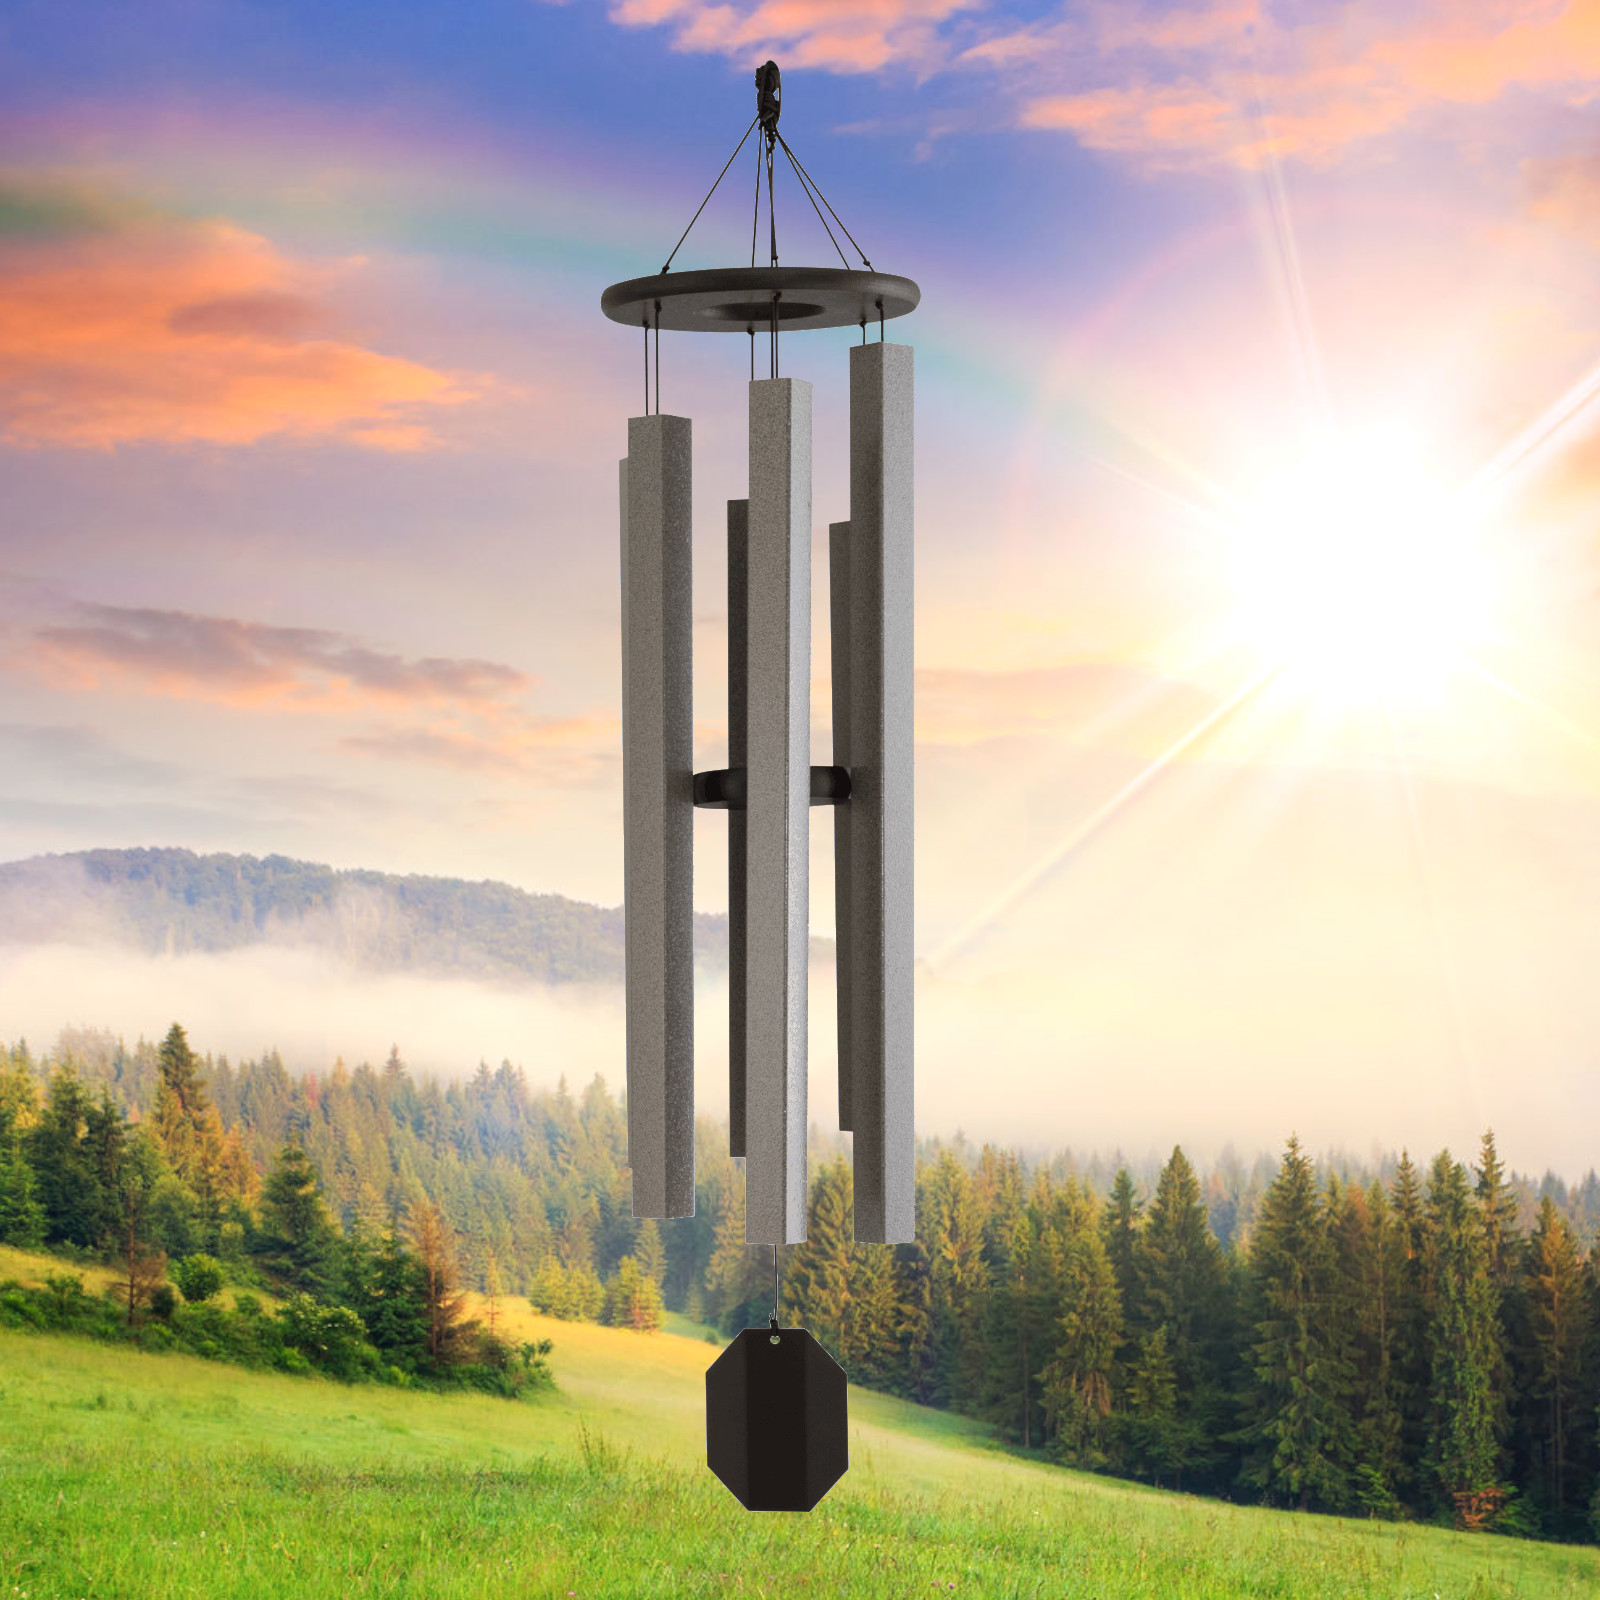 Lambright Country Chimes 46" Dutch Bell Wind Chime